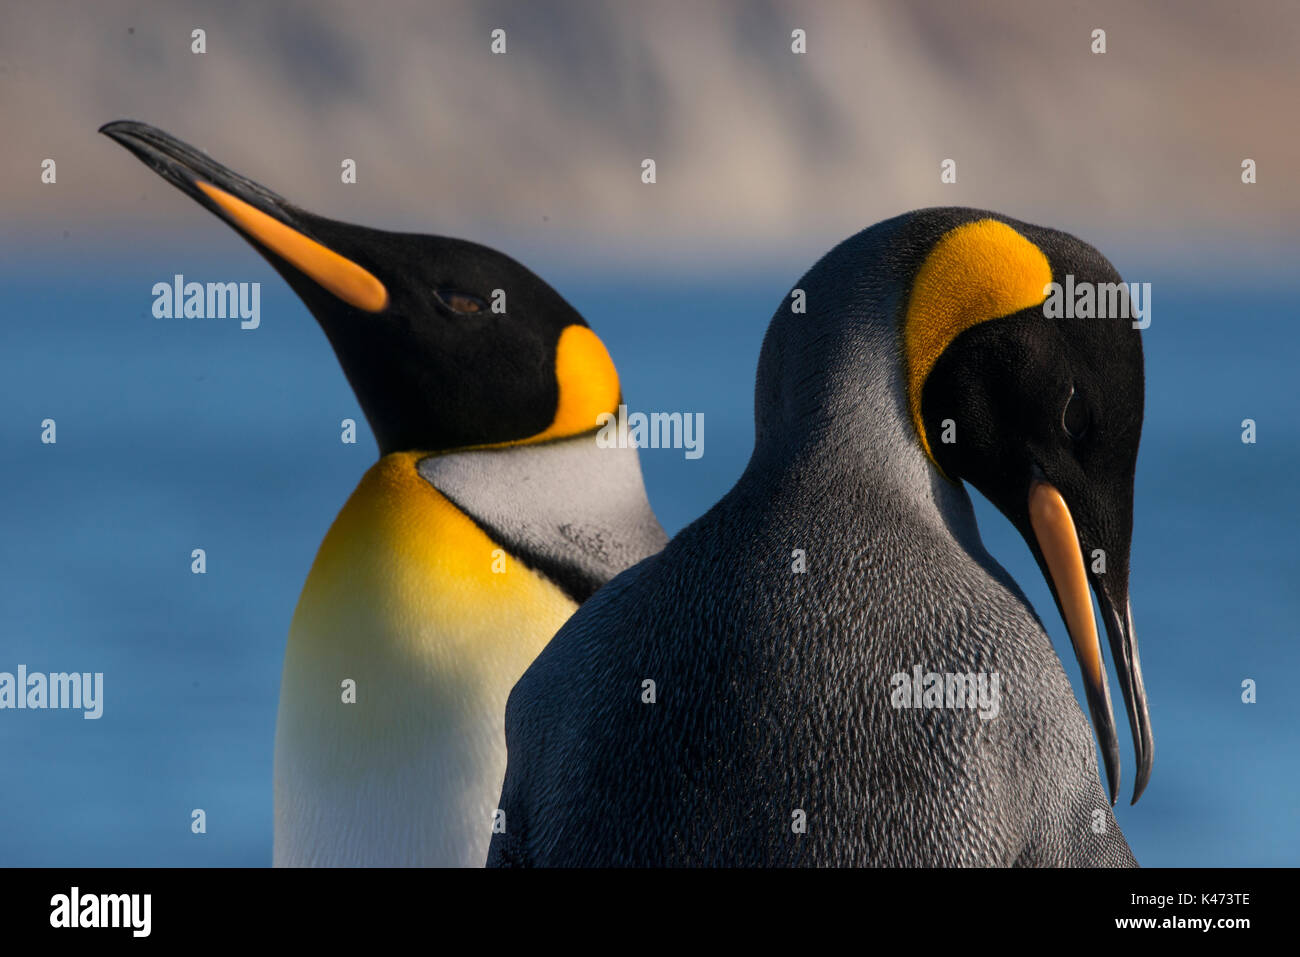 King Penguin (Aptenodytes patagonicus) from Tierra del Fuego, Chile Stock Photo